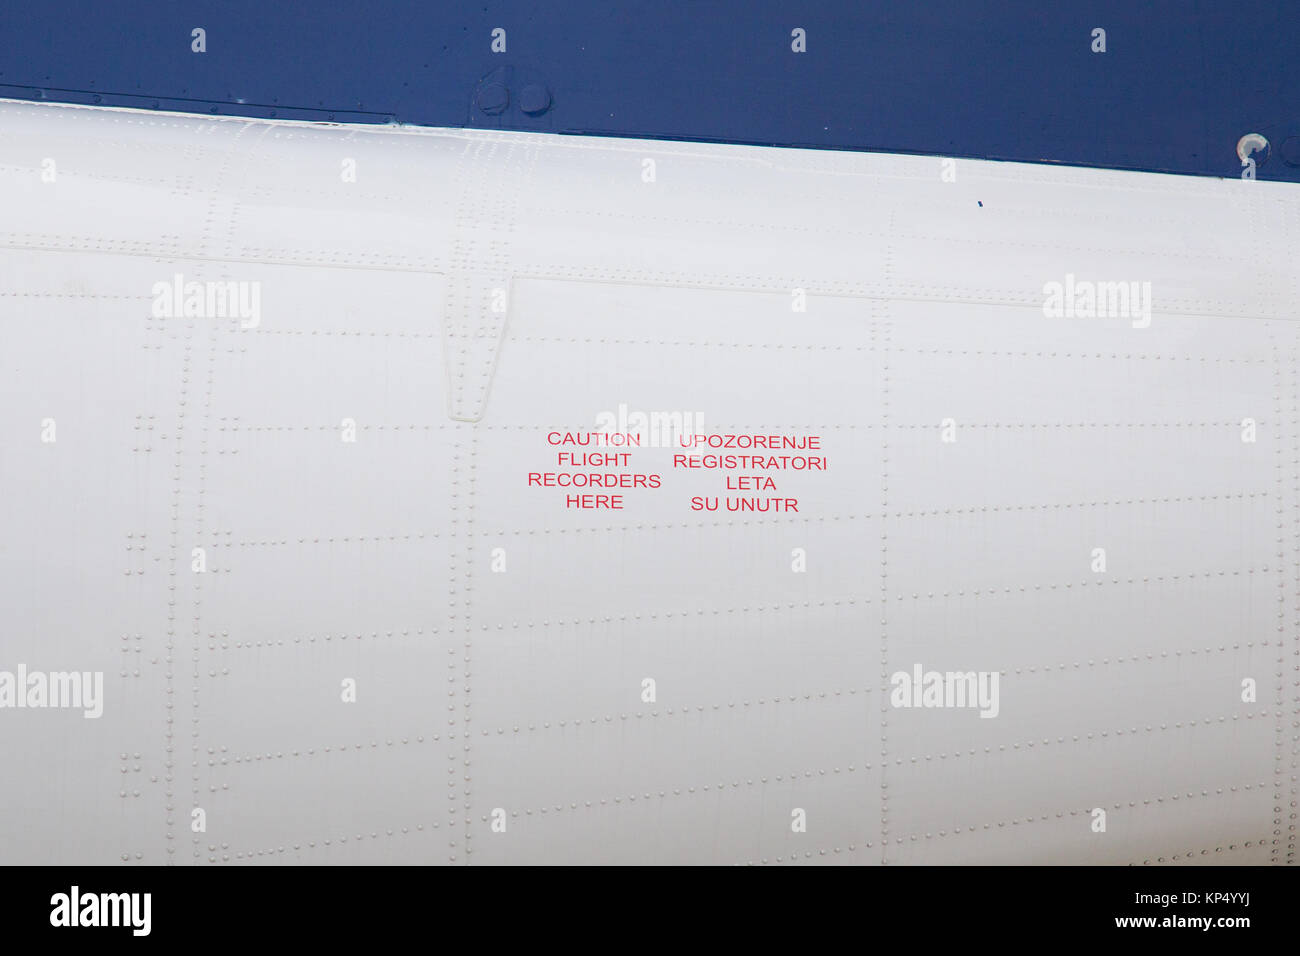 Caution flight recorders here written in English and Serbian language on the fuselage of Air Serbia ATR 72 aircraft Stock Photo